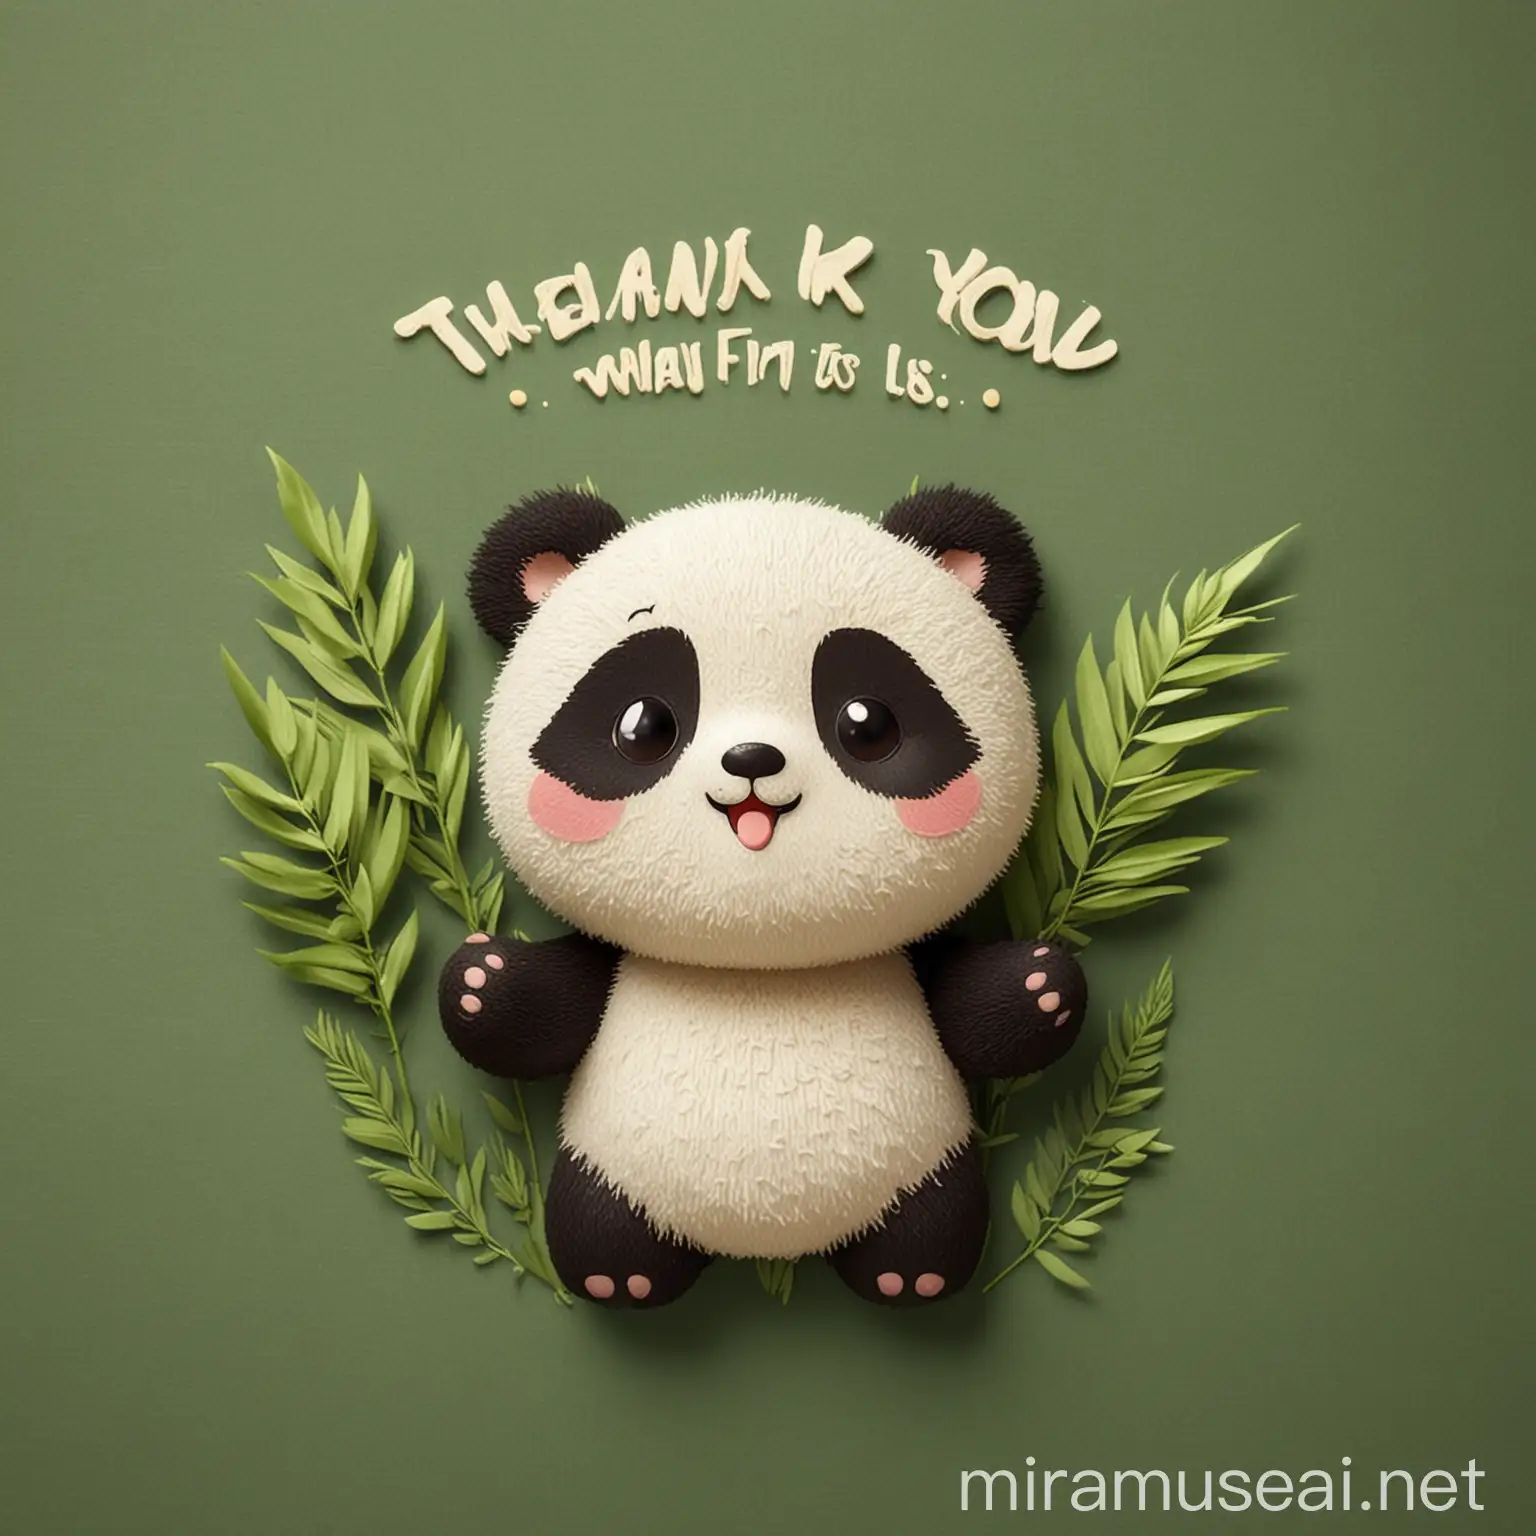 create a cute panda sprite that is giggling and saying thank you in Asian style pressed palms
